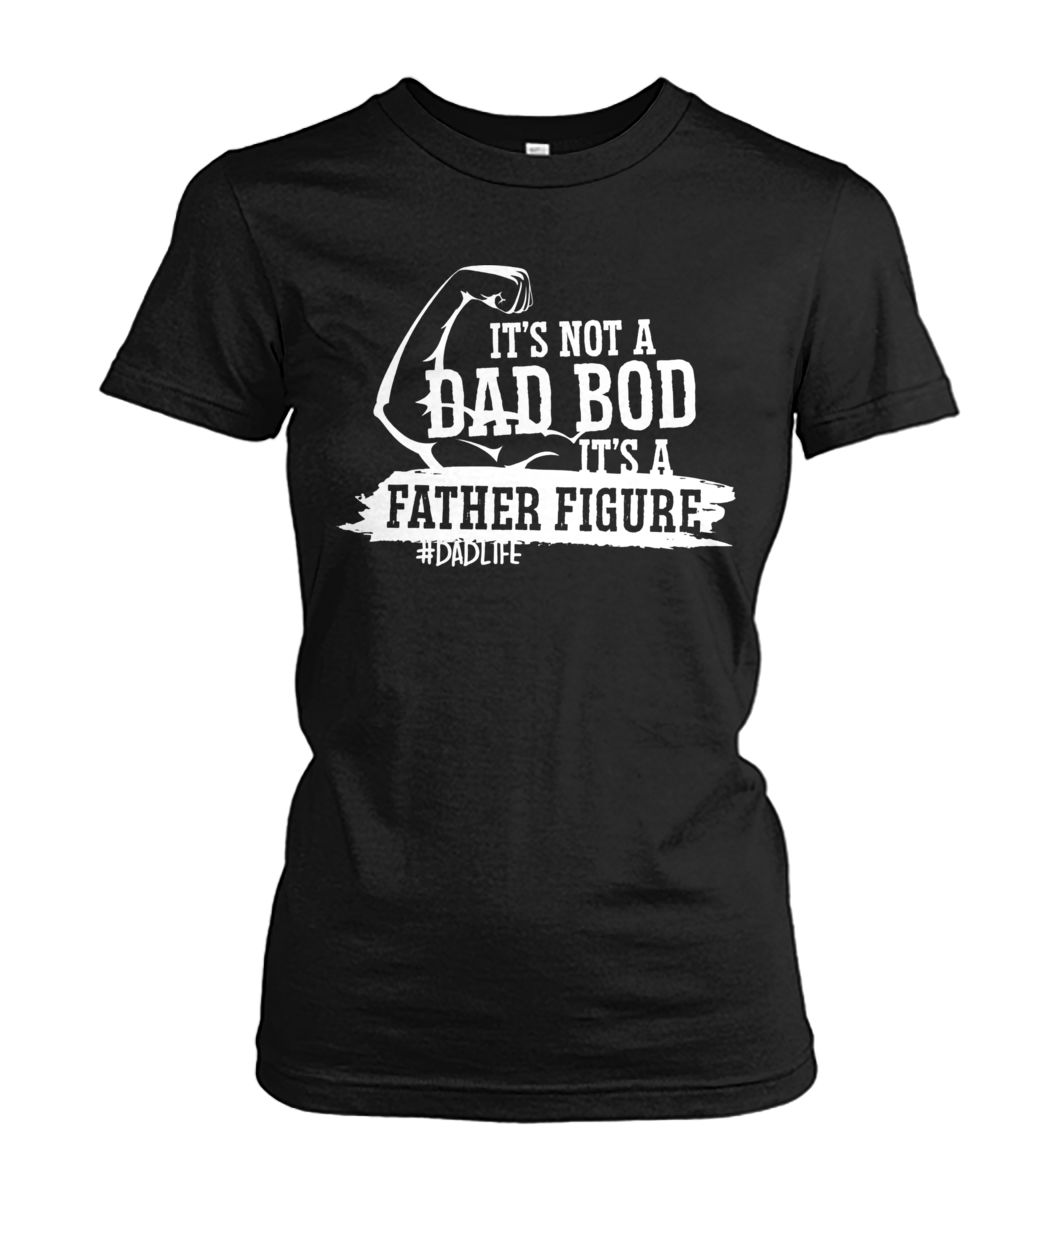 It's not a dad bod it's a father figure with arm women's crew tee